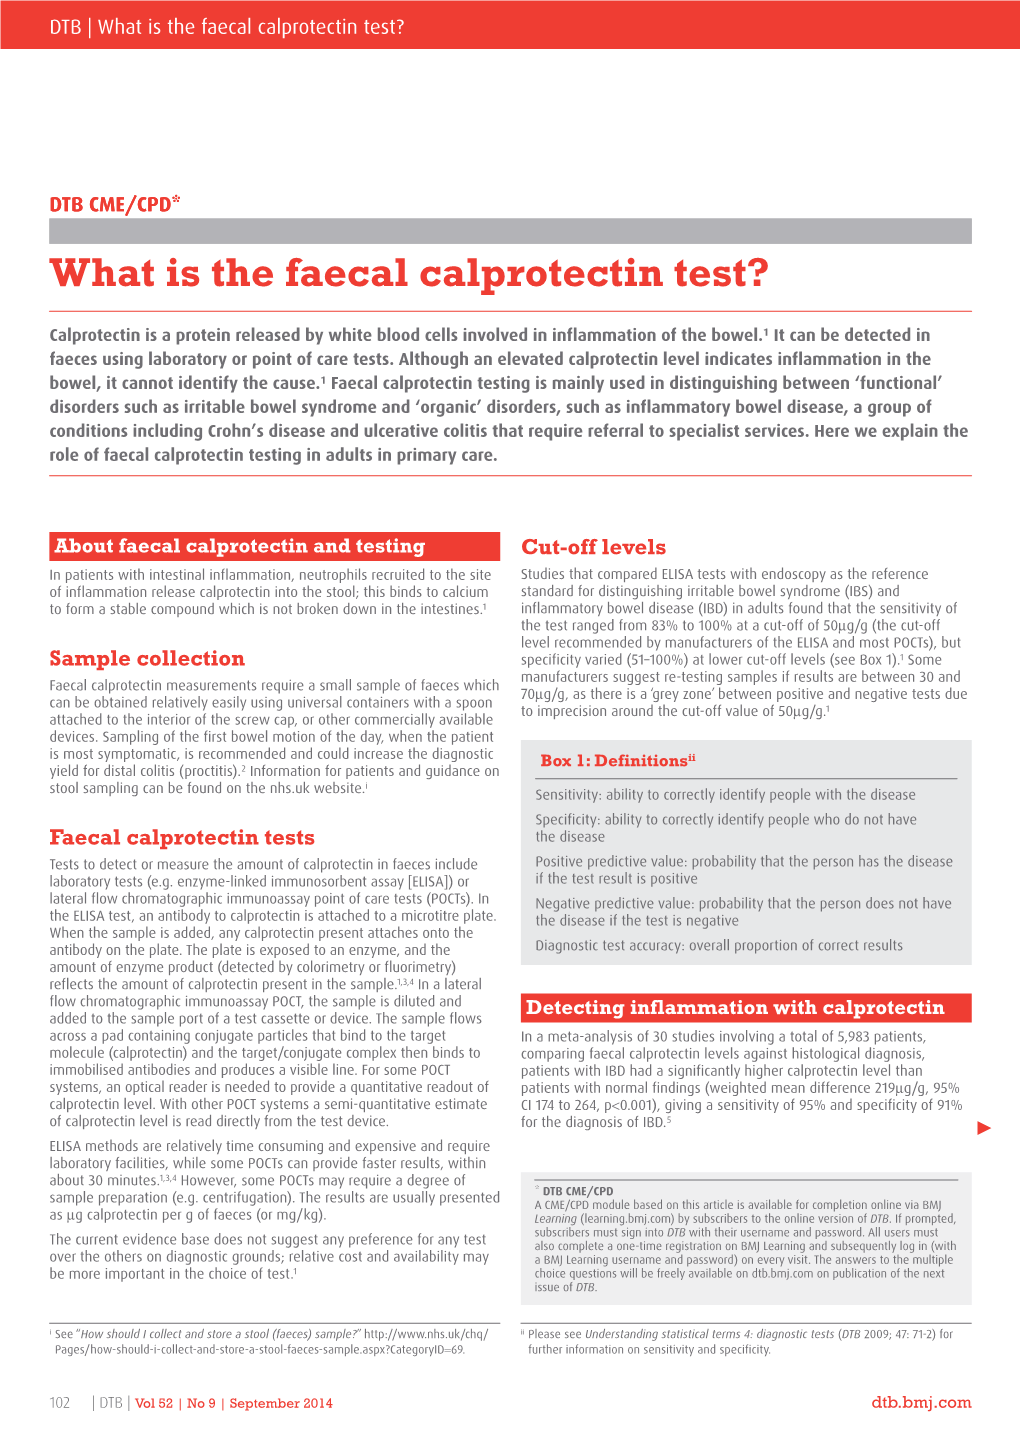 What Is the Faecal Calprotectin Test?